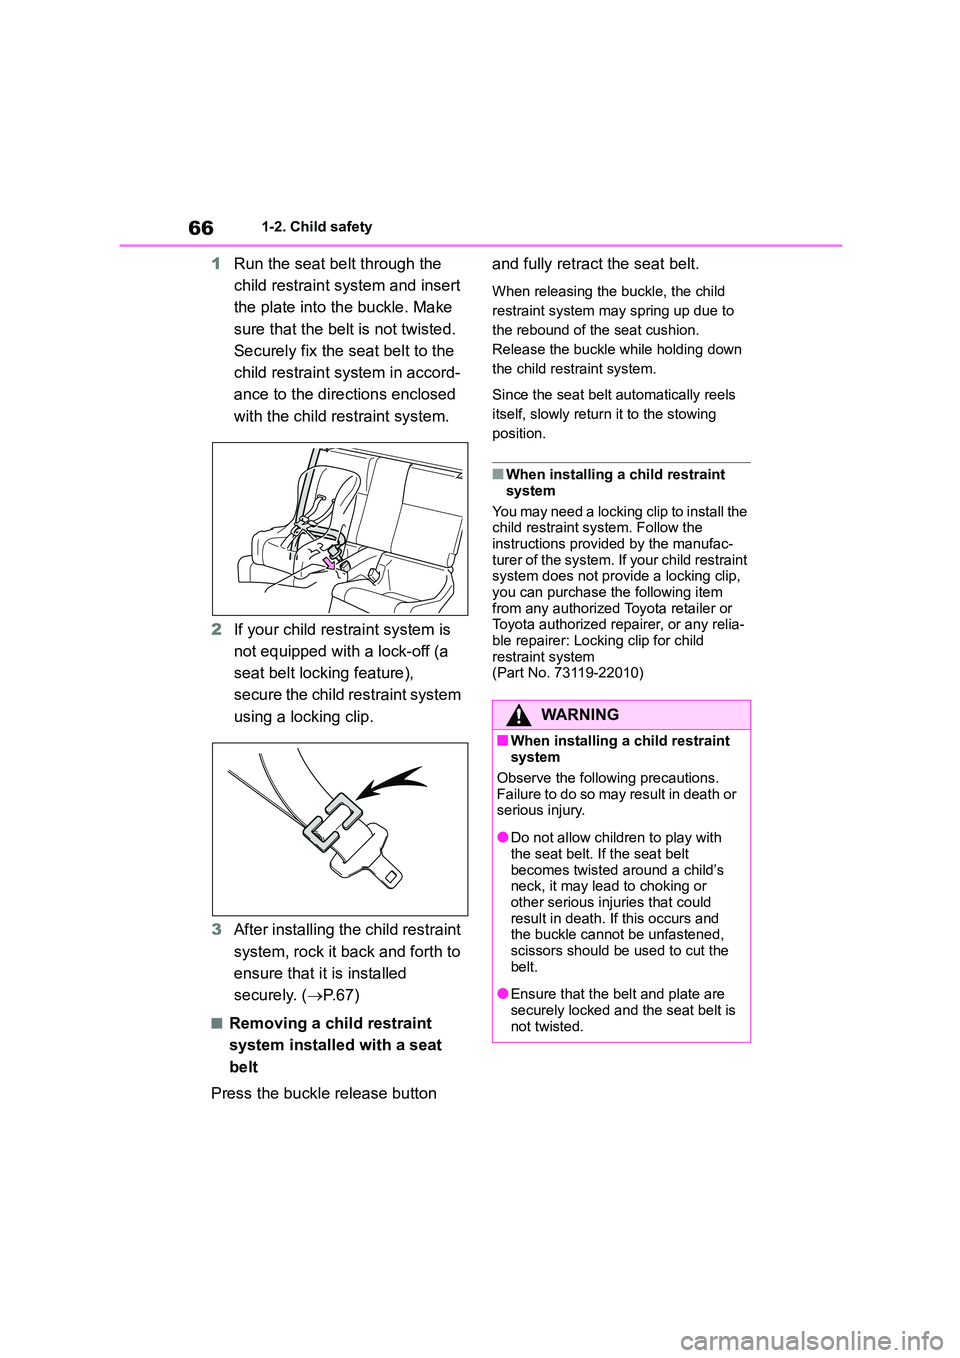 TOYOTA GR86 2022  Owners Manual (in English) 661-2. Child safety
1Run the seat belt through the  
child restraint system and insert 
the plate into th e buckle. Make  
sure that the belt is not twisted. 
Securely fix the seat belt to the 
child 